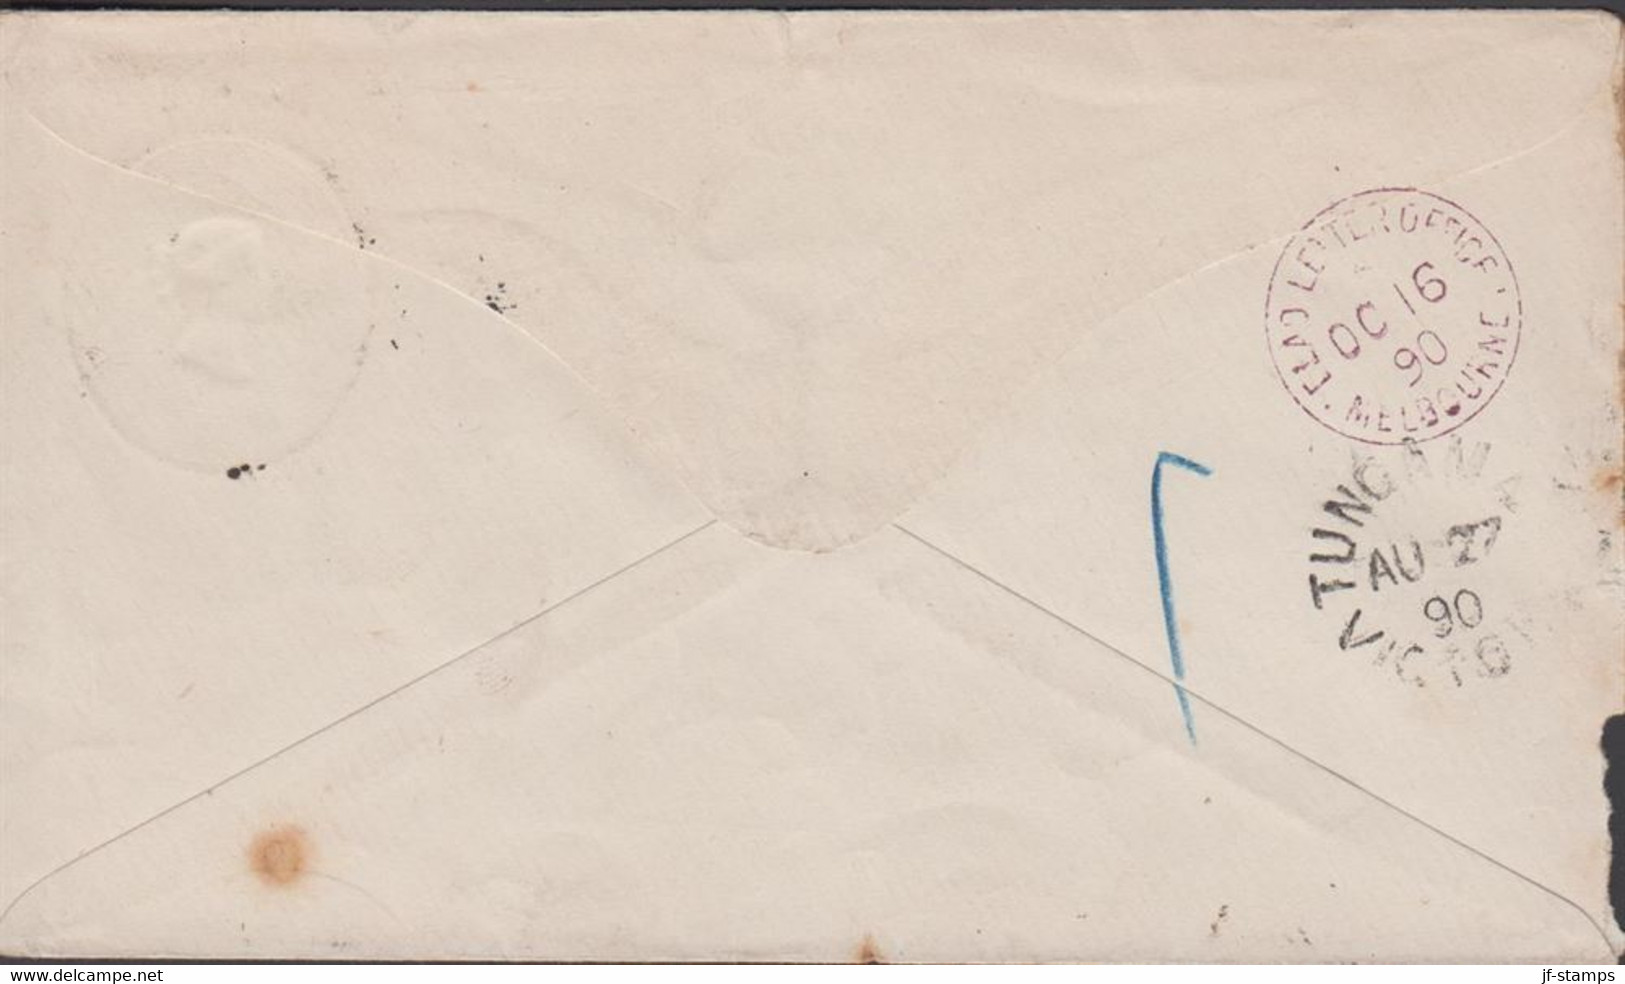 1890. VICTORIA POSTAGE ONE PENNY VICTORIA Envelope To Tungmal Cancelled MELBOURNE AU 26 90 + VICTORIA. Rev... - JF430272 - Lettres & Documents